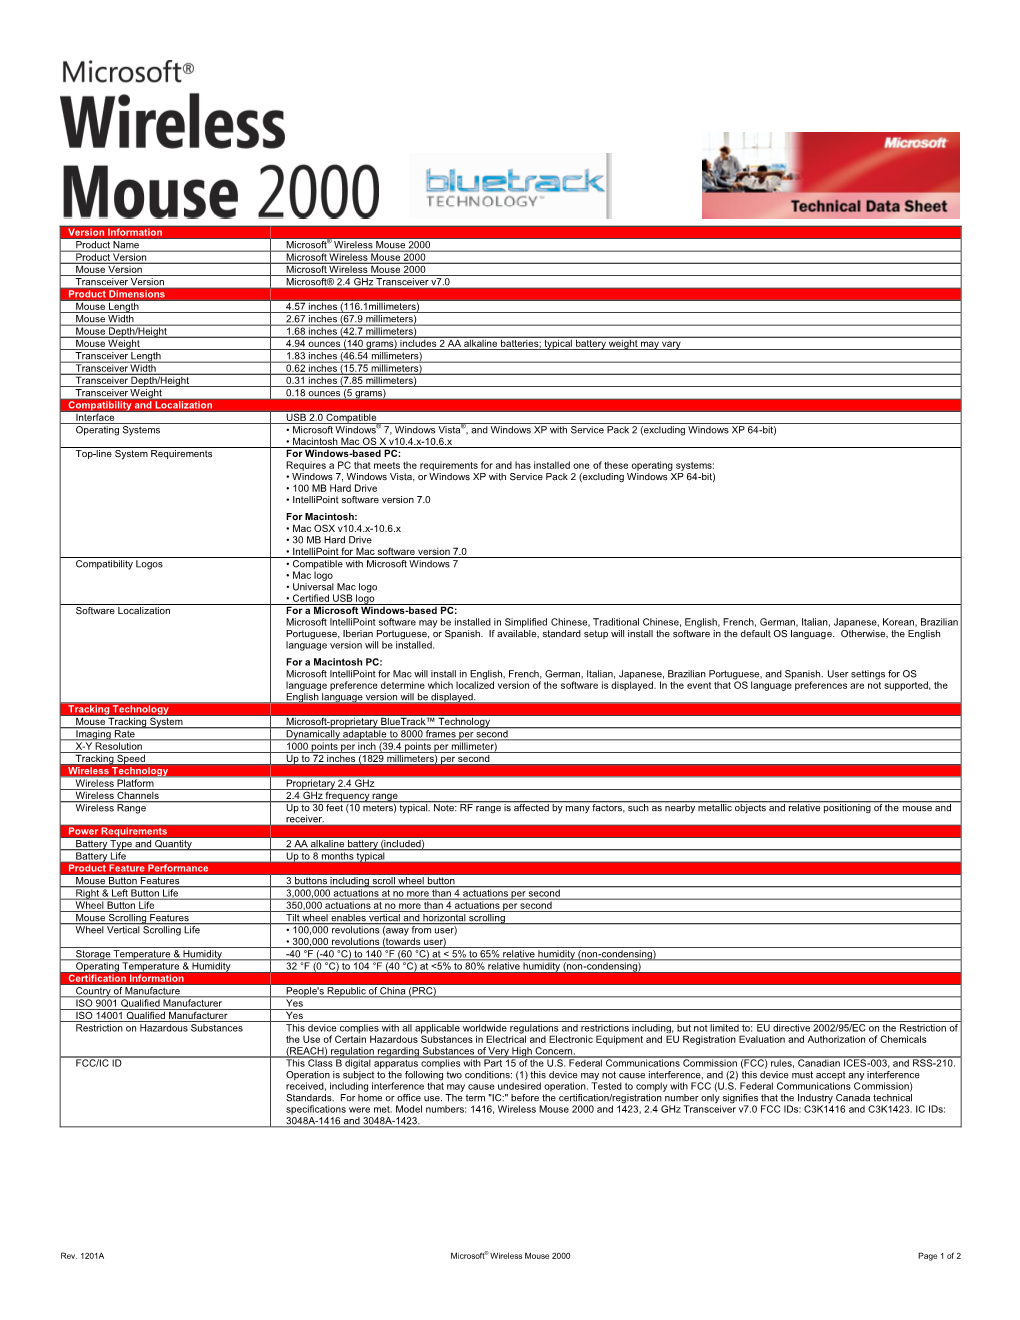 Version Information Product Name Microsoft® Wireless Mouse 2000